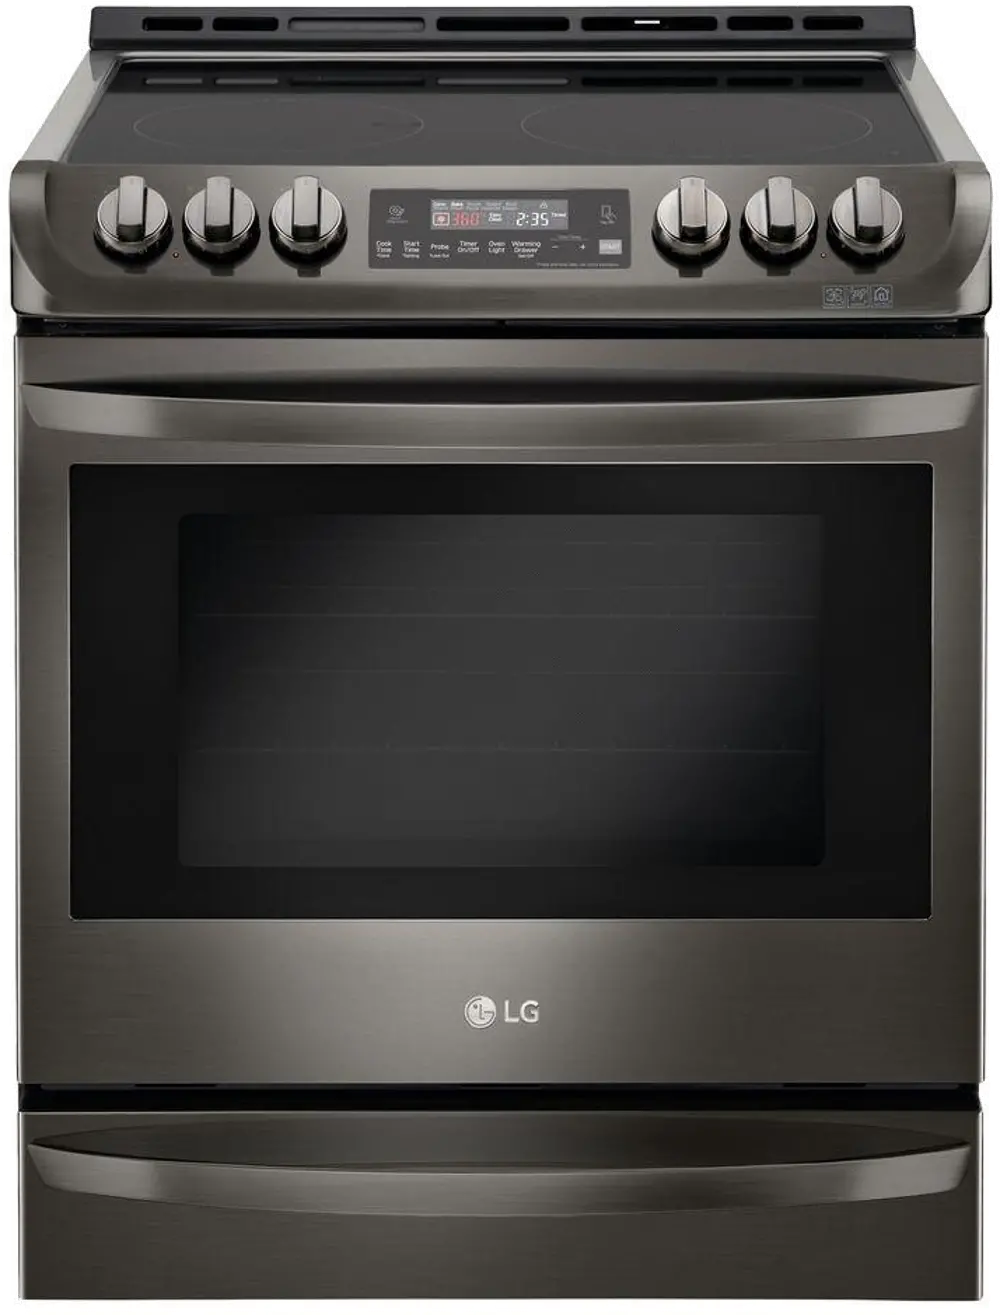 LSE4613BD LG Electric Range with ProBake Convection - 6.3 cu. ft. Black Stainless Steel-1